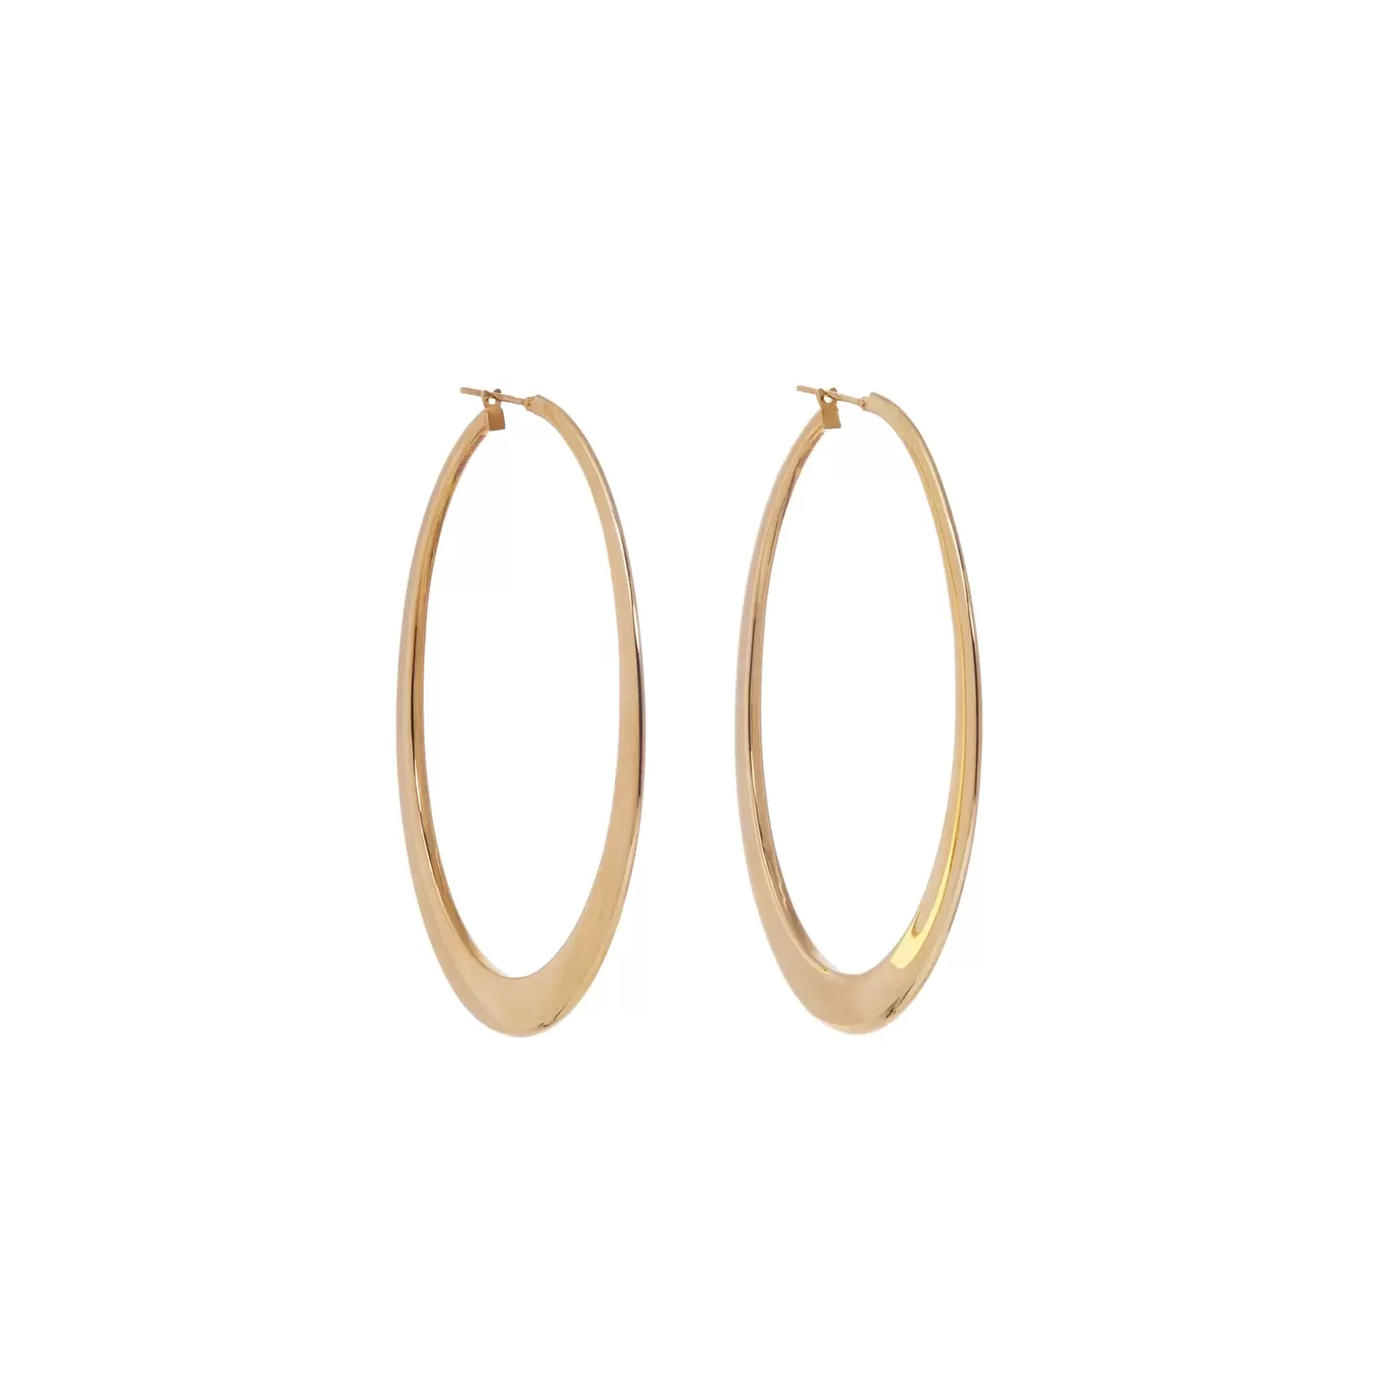 Sidney-Garber-18K-Yellow-Gold-Crescent-Hoops-amarees